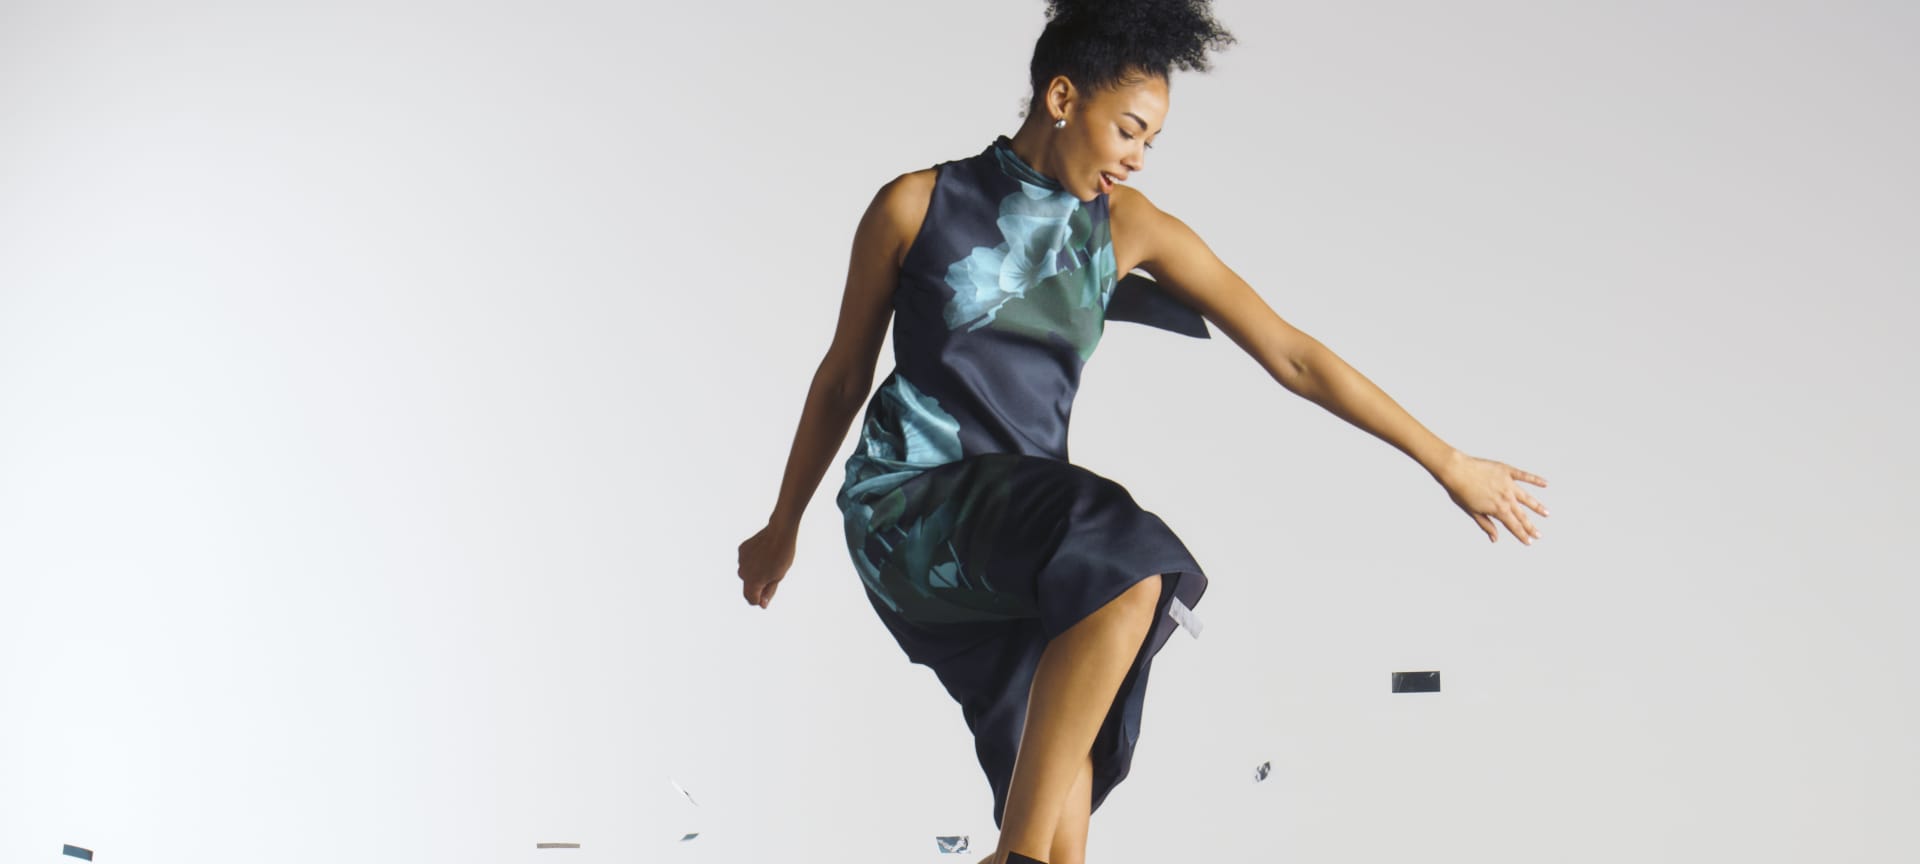 woman jumping in a floral print dres